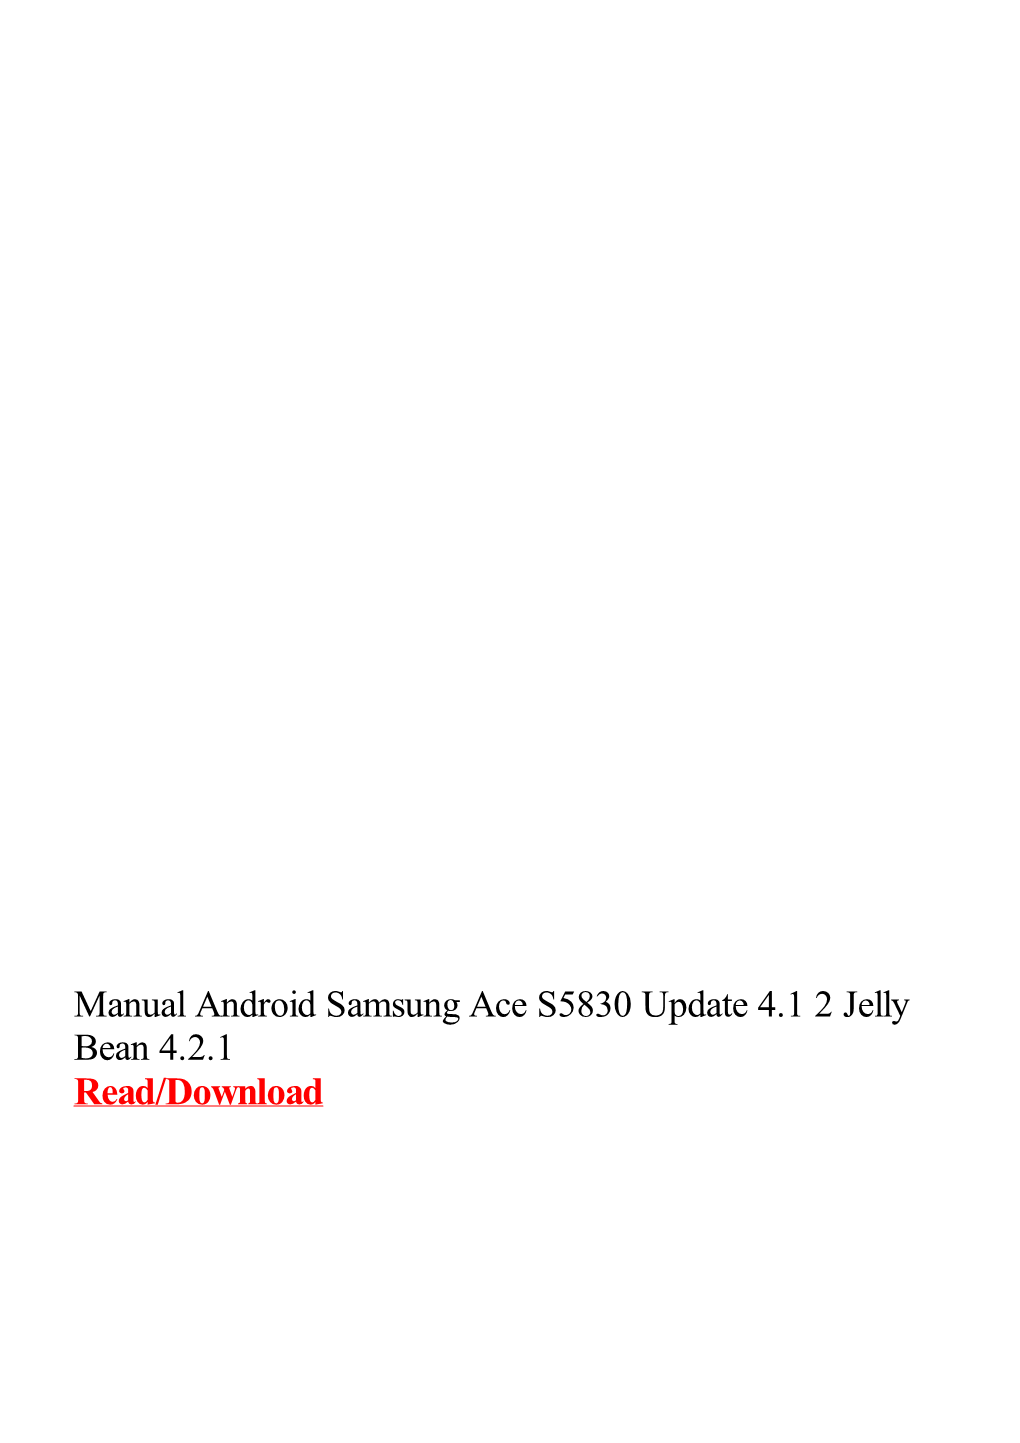 Manual Android Samsung Ace S5830 Update 4.1 2 Jelly Bean 4.2.1.Pdf